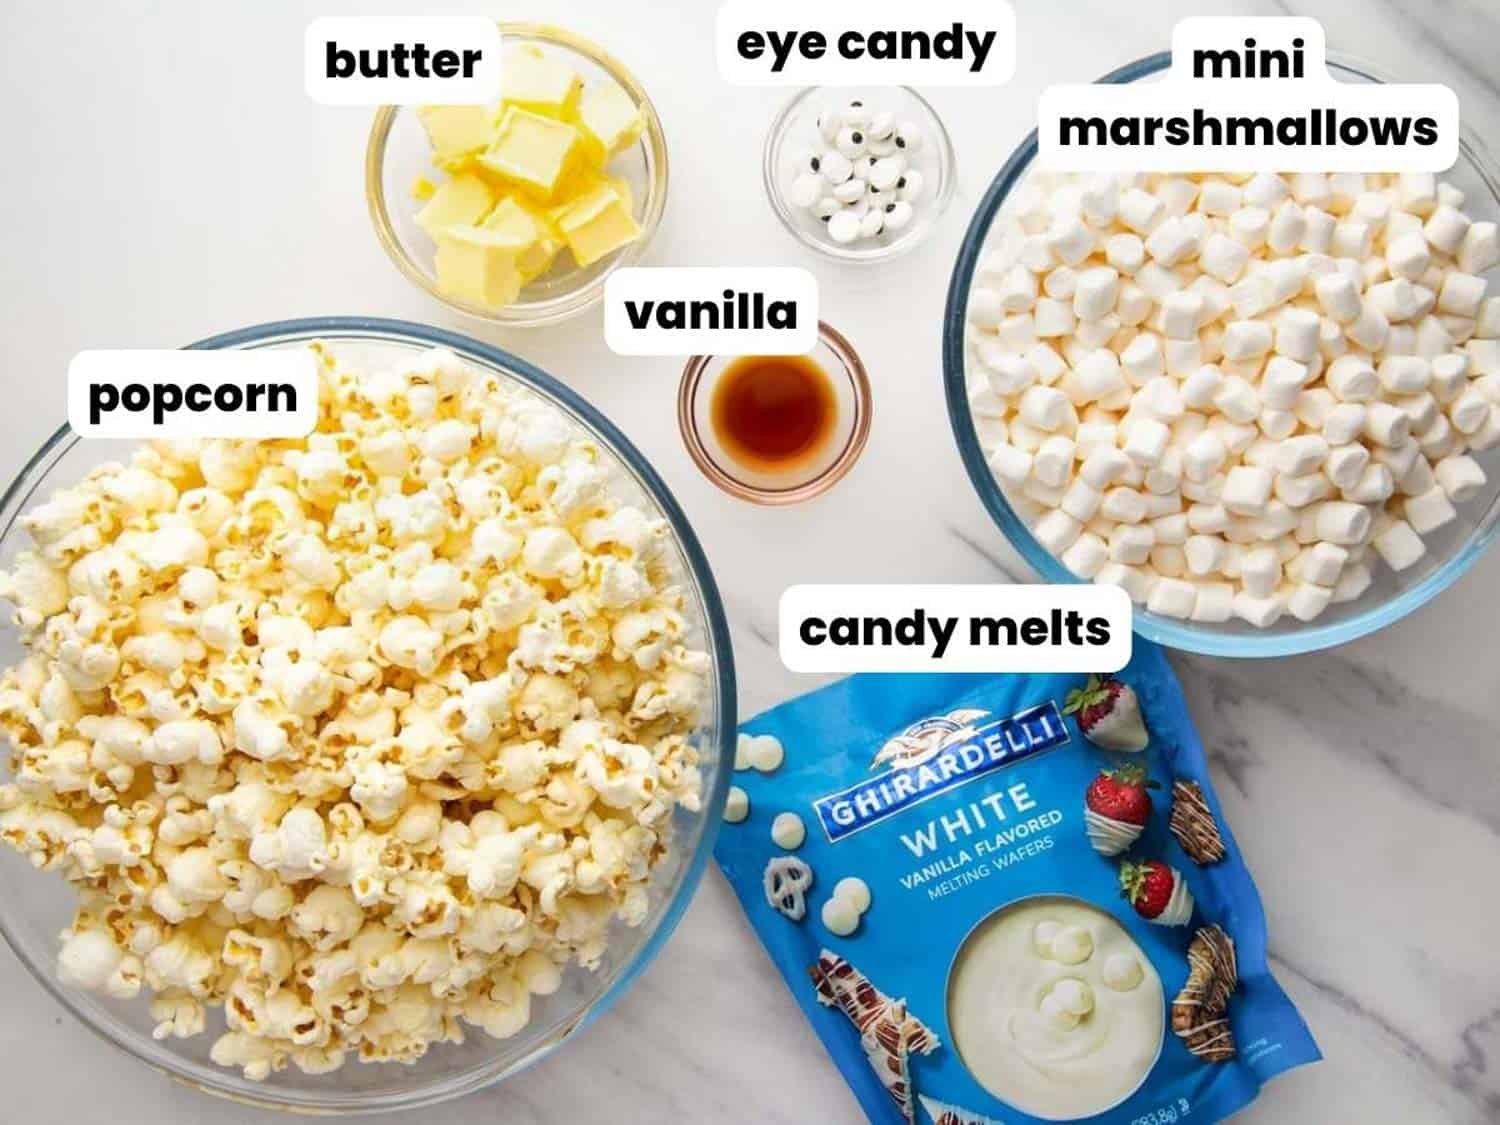 The ingredients you'll need to make Marshmallow popcorn balls